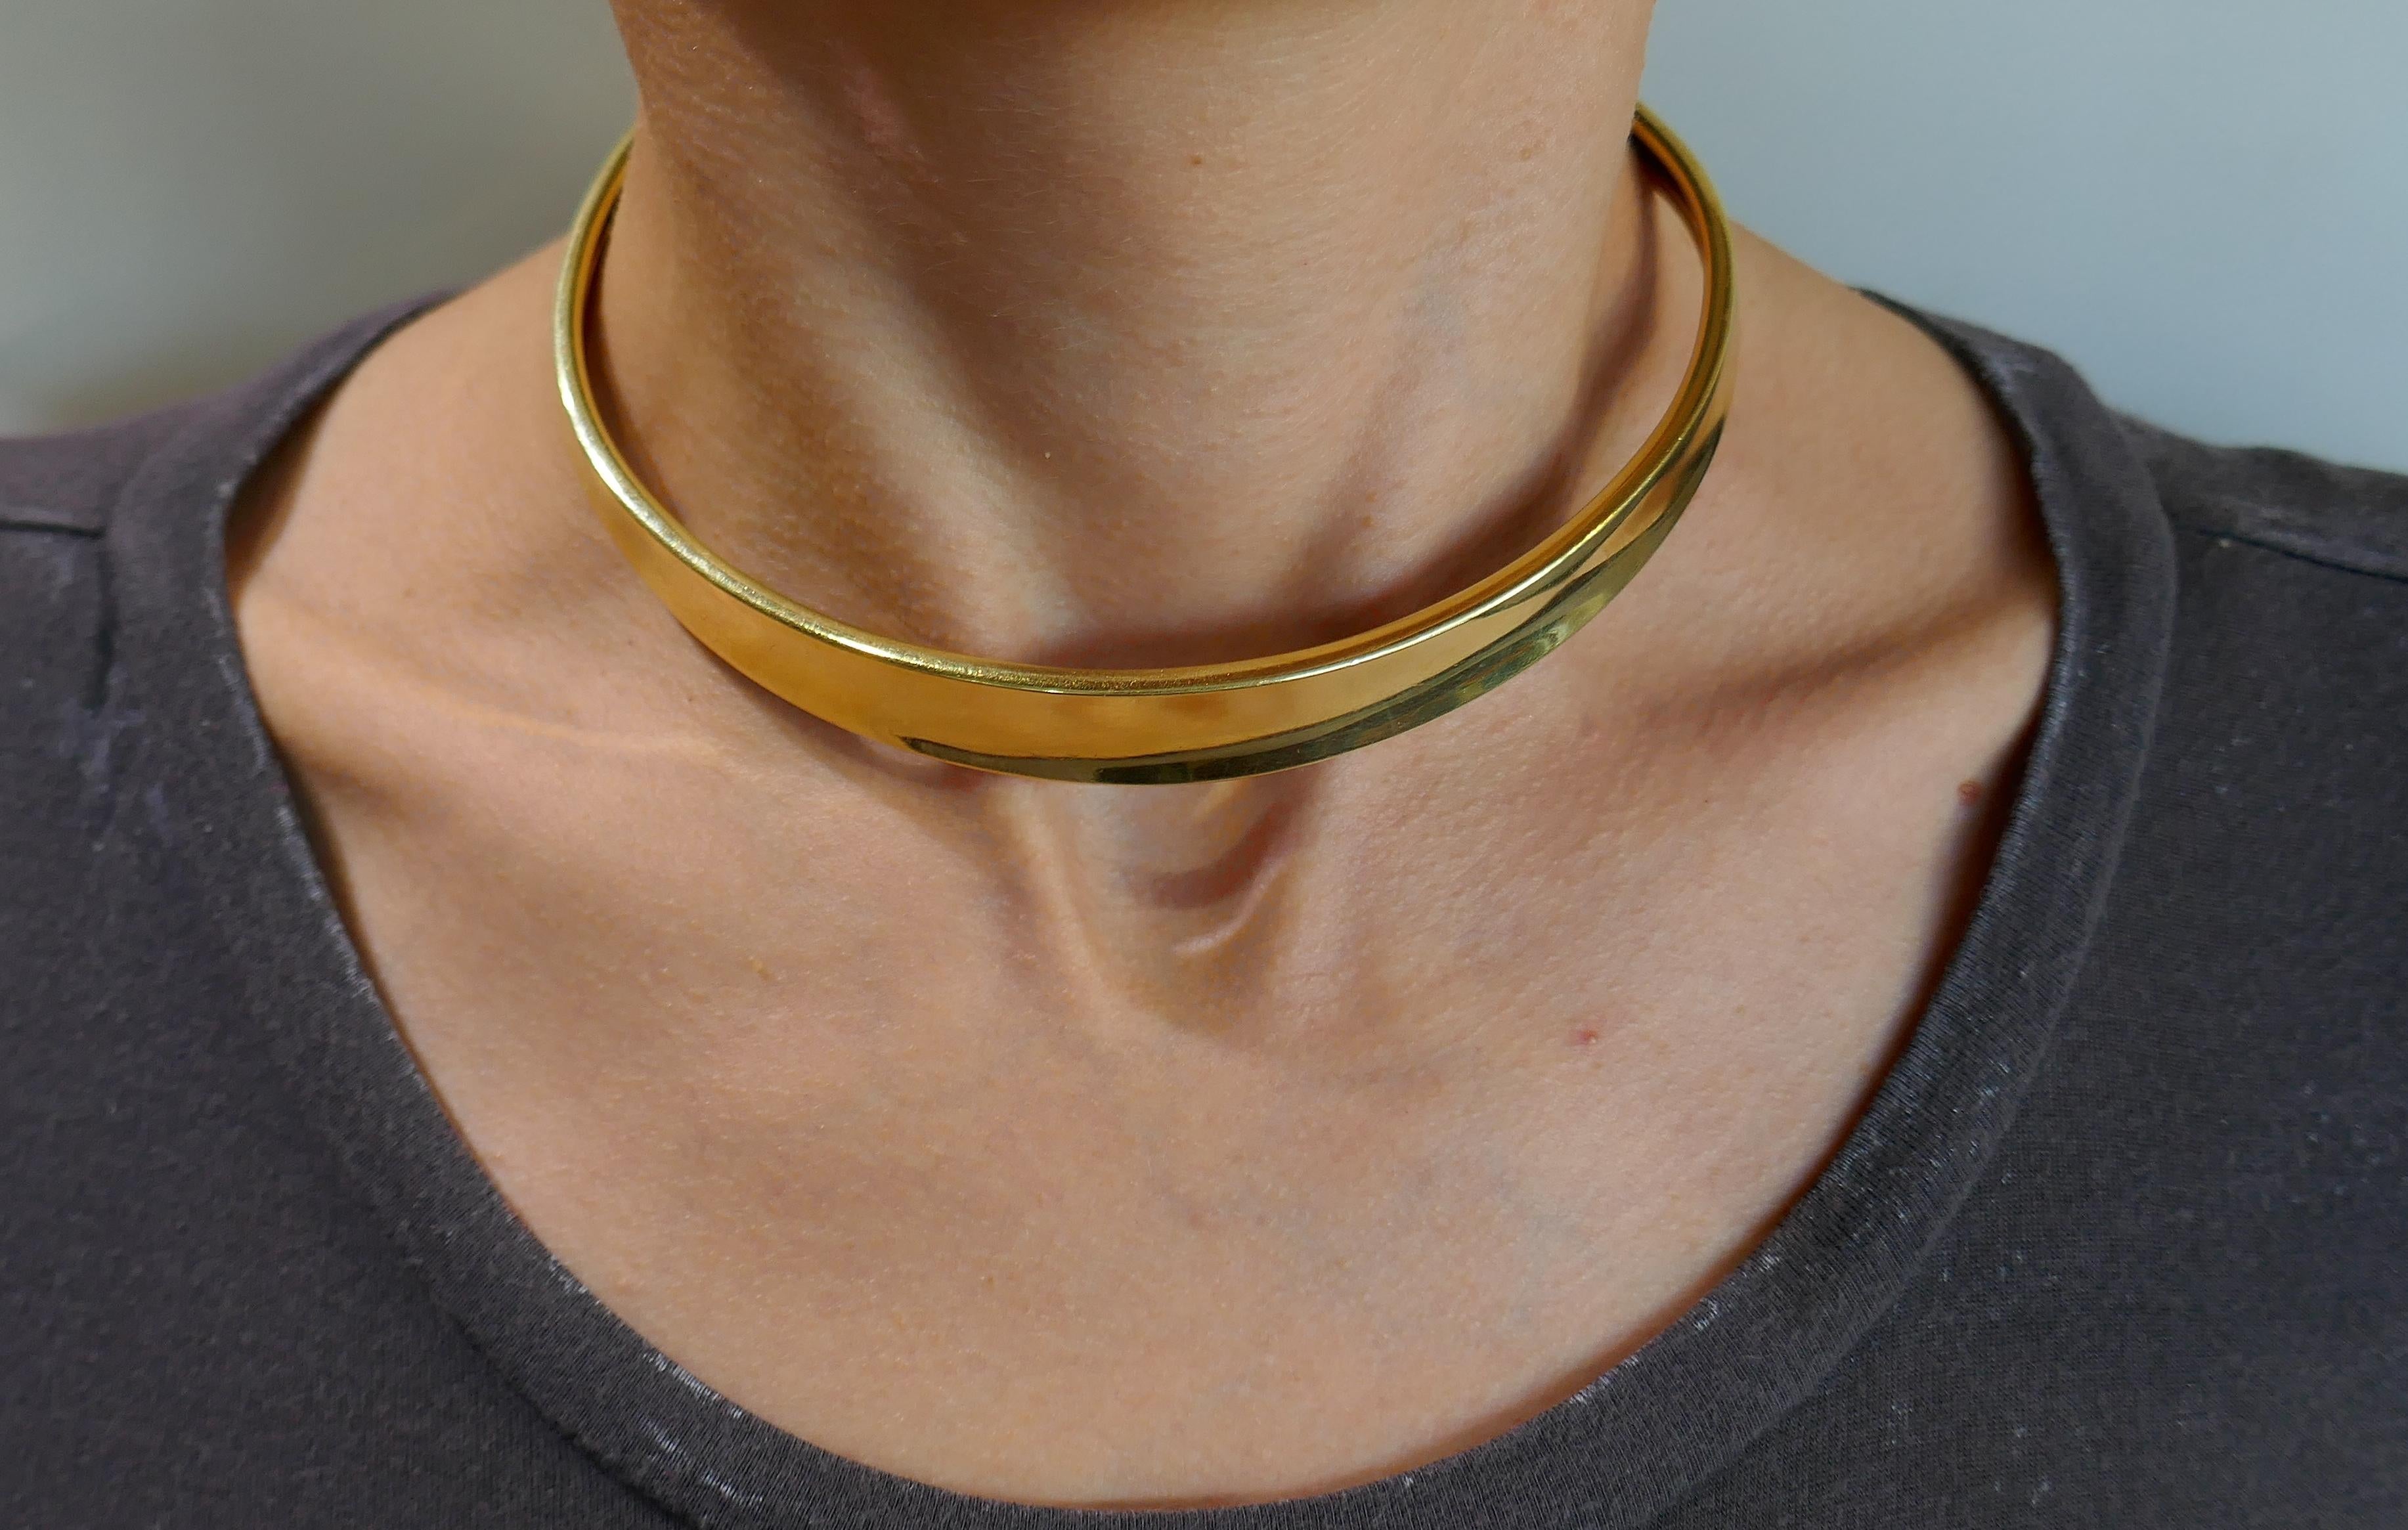 Simple, elegant and classy choker necklace created by Robert Lee Morris. Chic and wearable, the necklace is a great addition to your jewelry collection.
The necklace is made of 18k yellow gold.
The necklace measures 11-1/2 x 1/2 inches (29 x 1.4